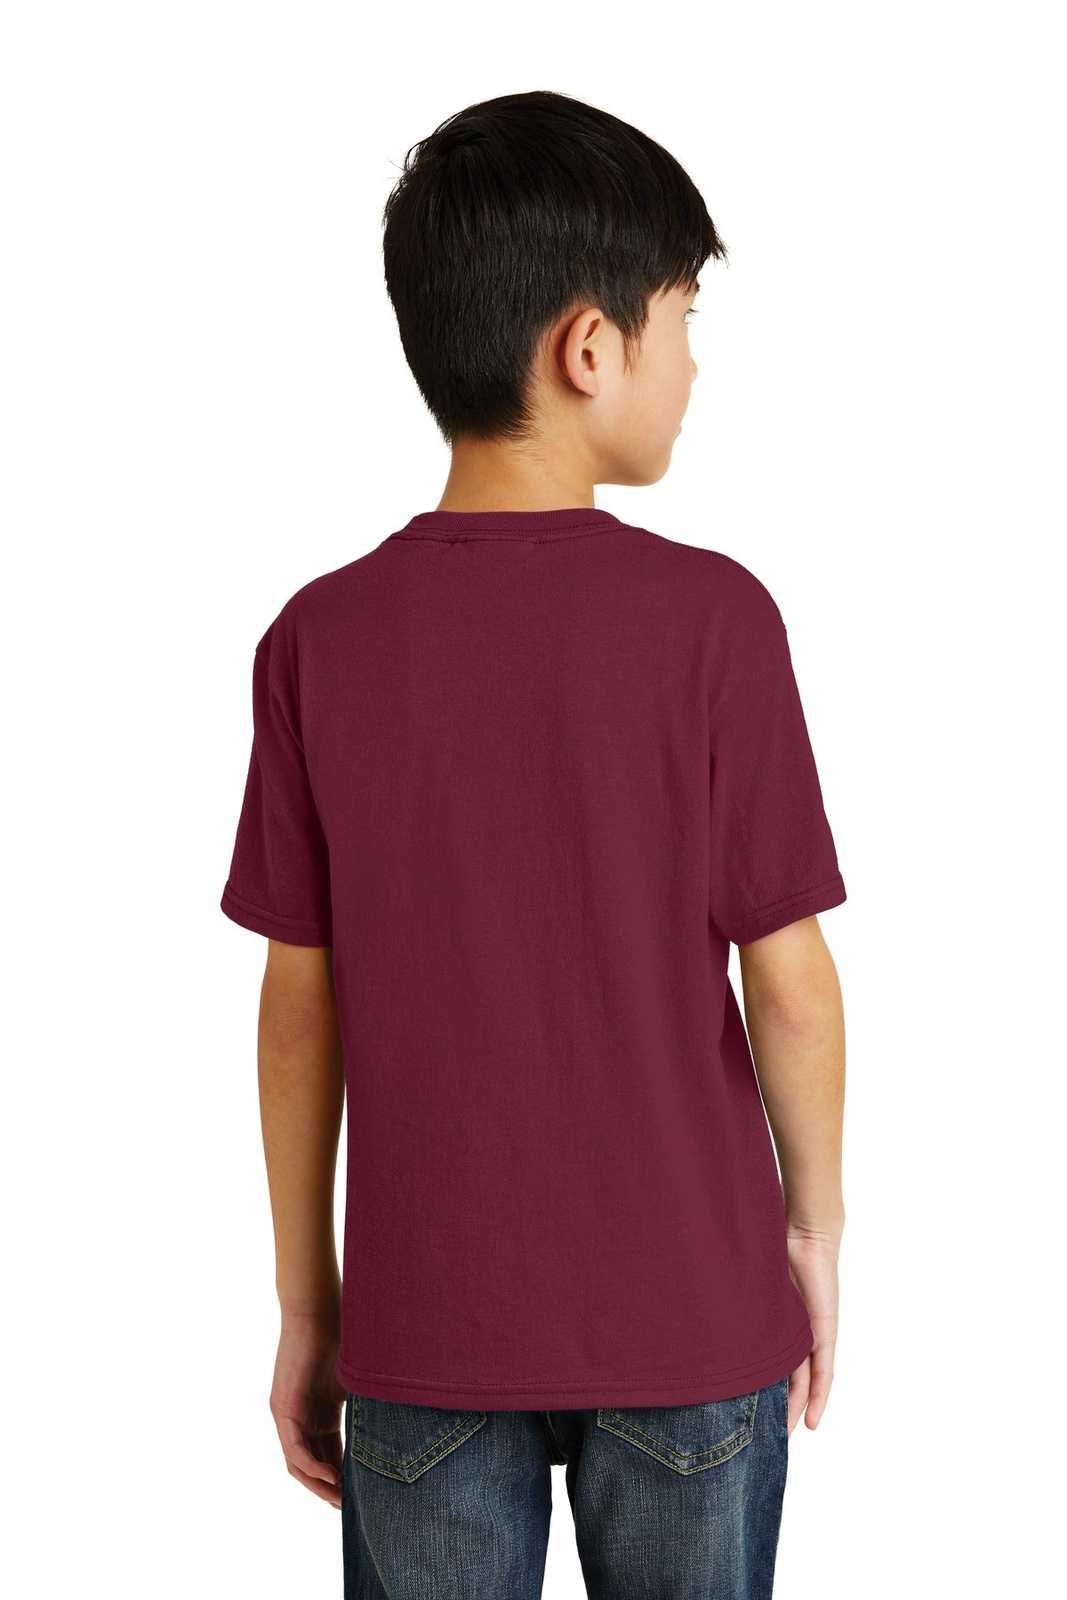 Port & Company PC55Y Youth Core Blend Tee - Cardinal - HIT a Double - 1